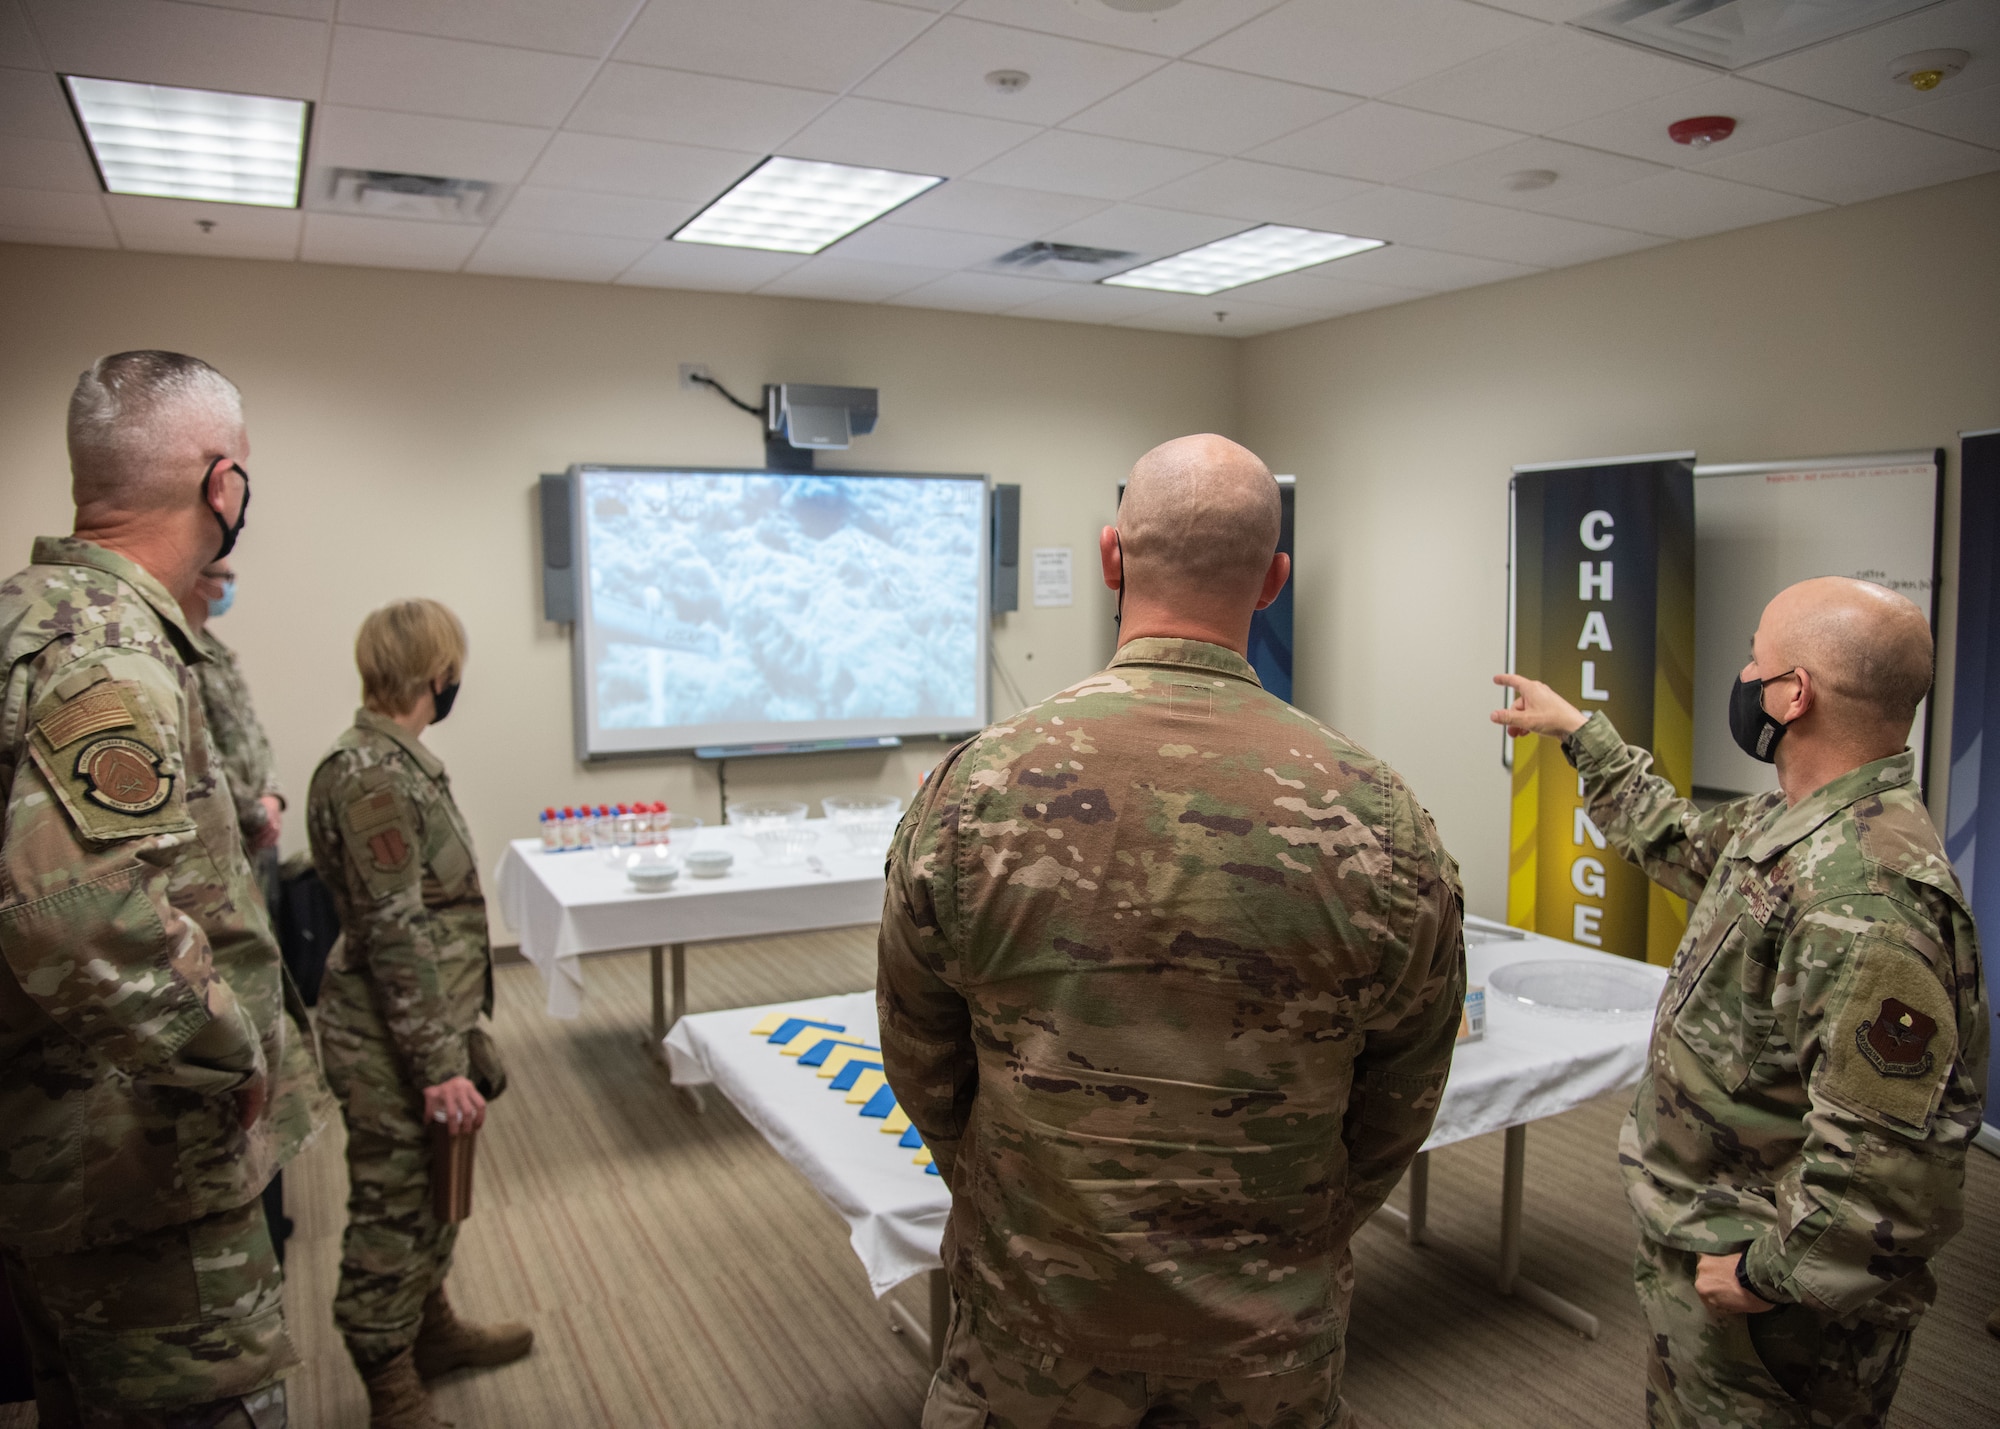 U.S. Air Force Capt. Mathew Riddle, 315th Training Squadron officer in charge of the intelligence officer course team, center, shows Col. Andres Nazario, 17th Training Wing commander, right, the recreation room in the Consolidated Learning Center on Goodfellow Air Force Base, Texas, April 15, 2021. This room was used as part of the tour conducted at the new intelligence virtual learning center in the CLC. (U.S. Air Force photo by Staff Sgt. Tyrell Hall)